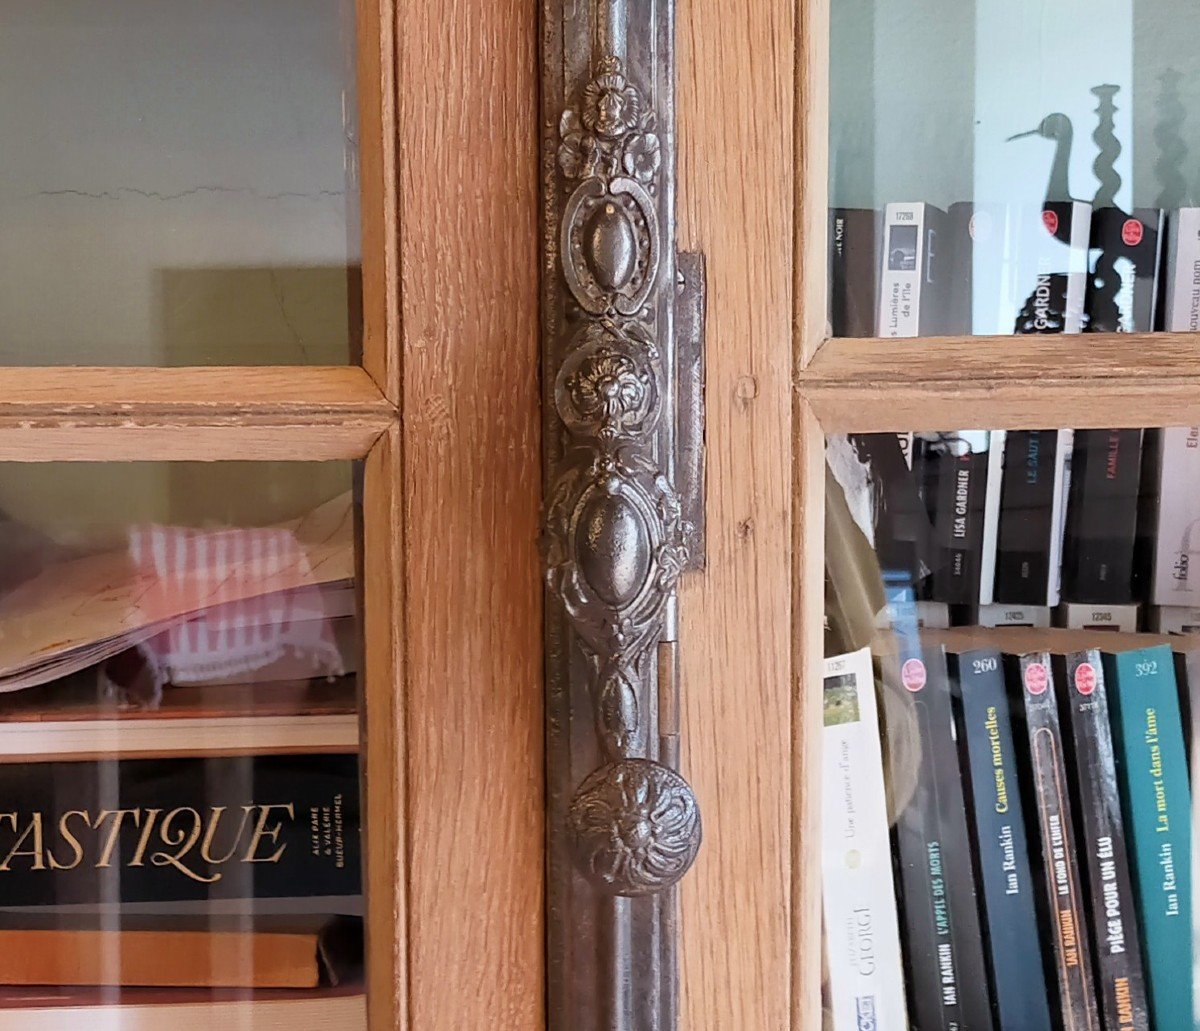 Large Old 19th Century Castle Window And Its Handle For Showcase Library Door Furniture-photo-1